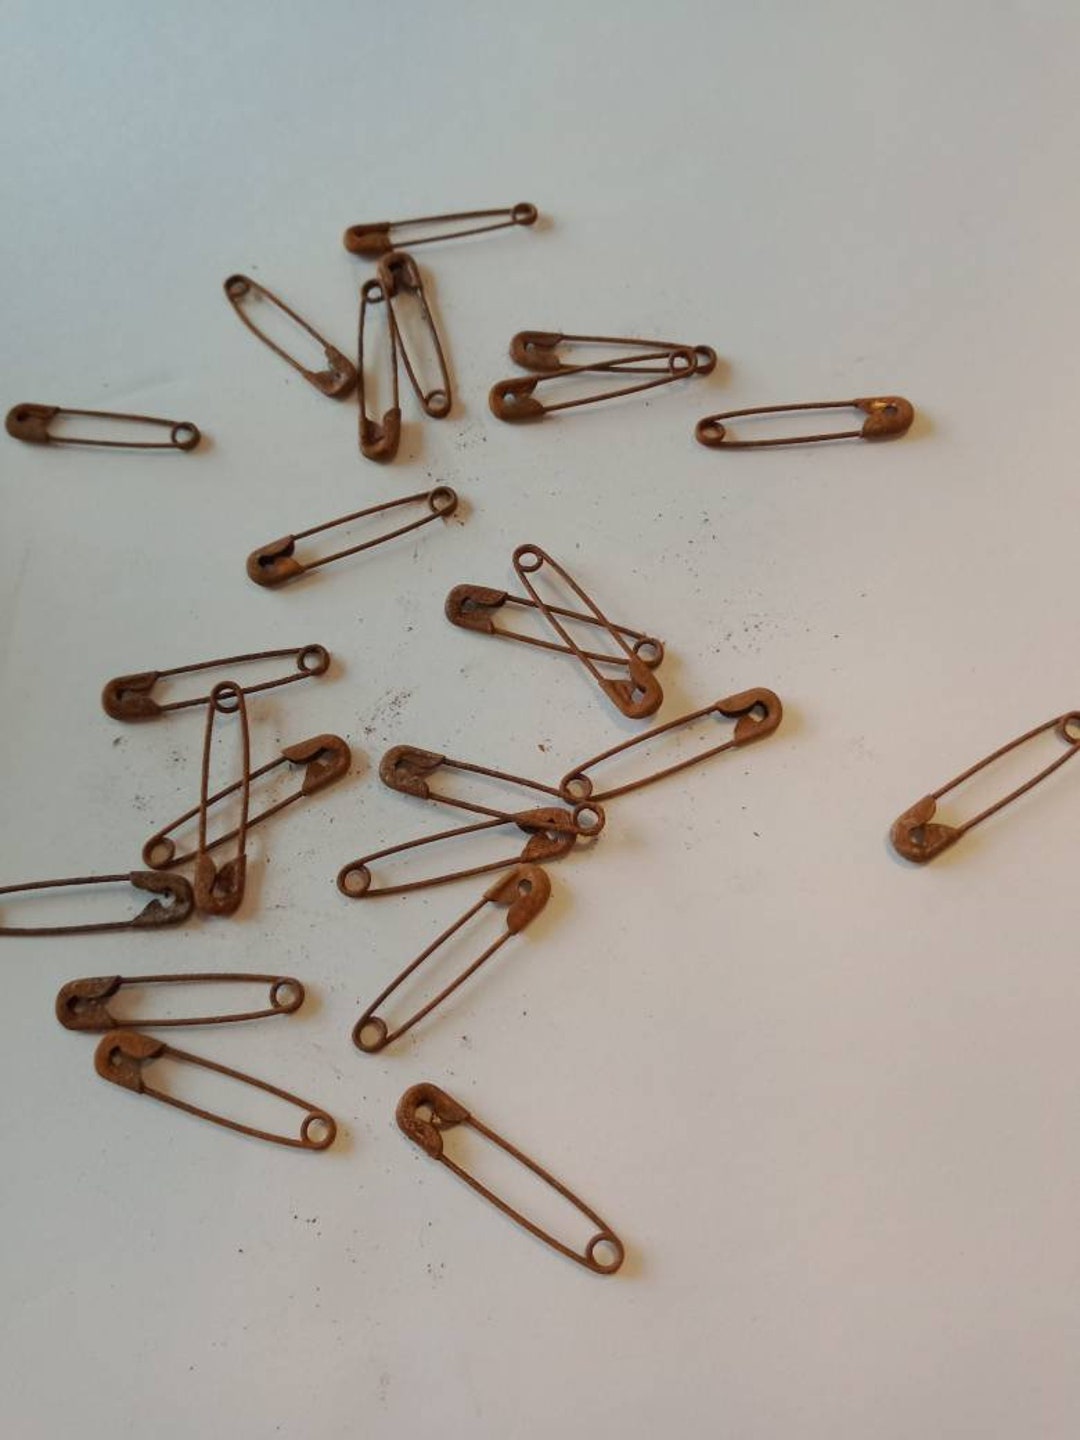 10 Rusty Safety Pins, Small Size - Etsy